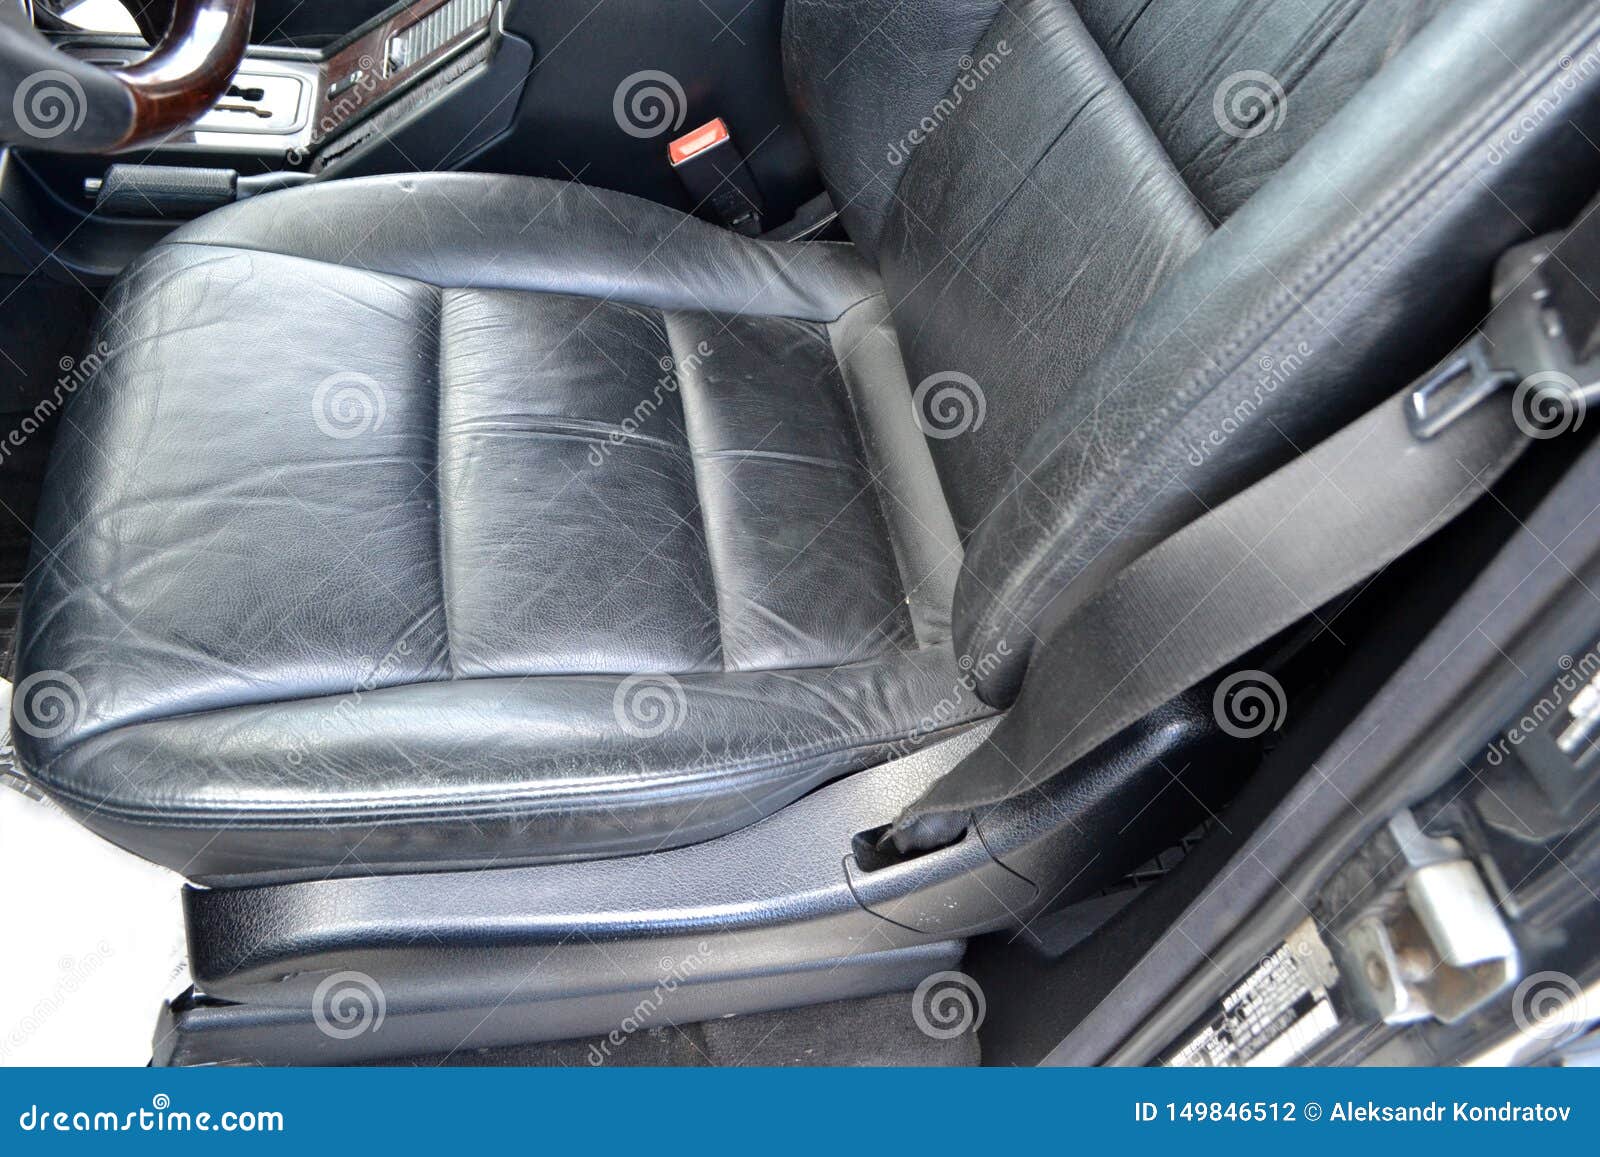 Car Detailer Cleaning and Protecting Leather Vehicle Interior